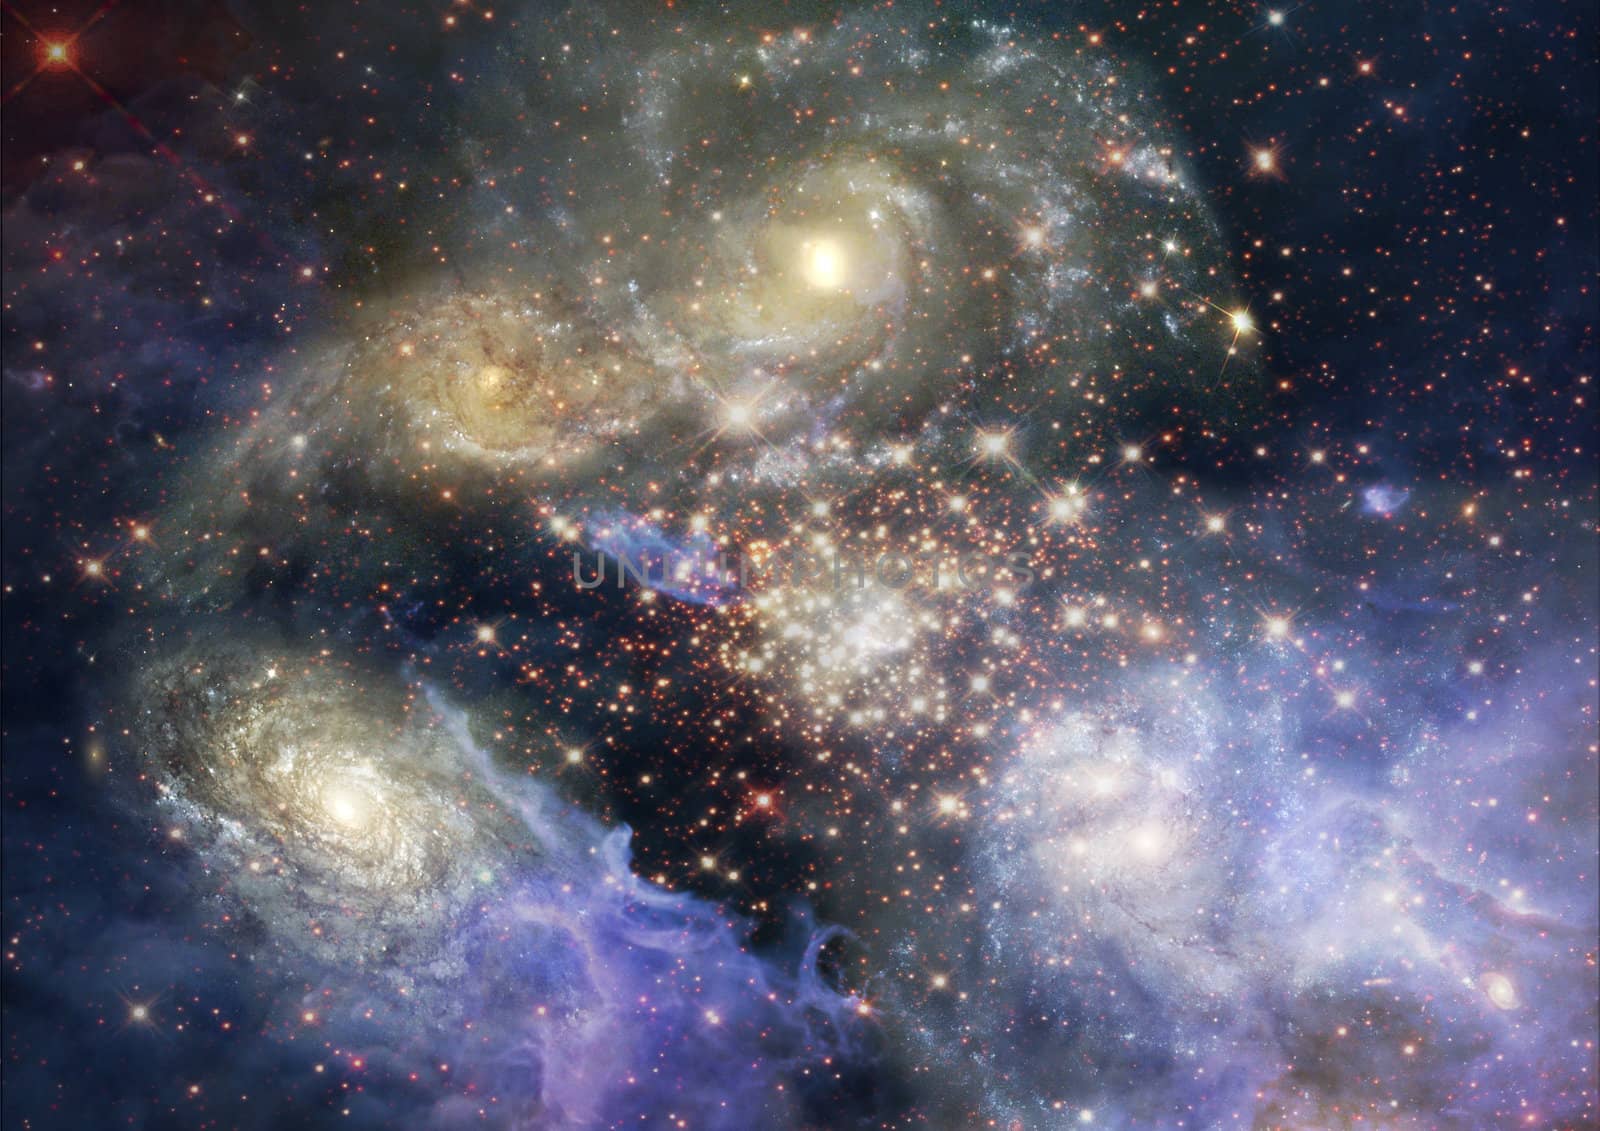 Space stars and nebula by richter1910